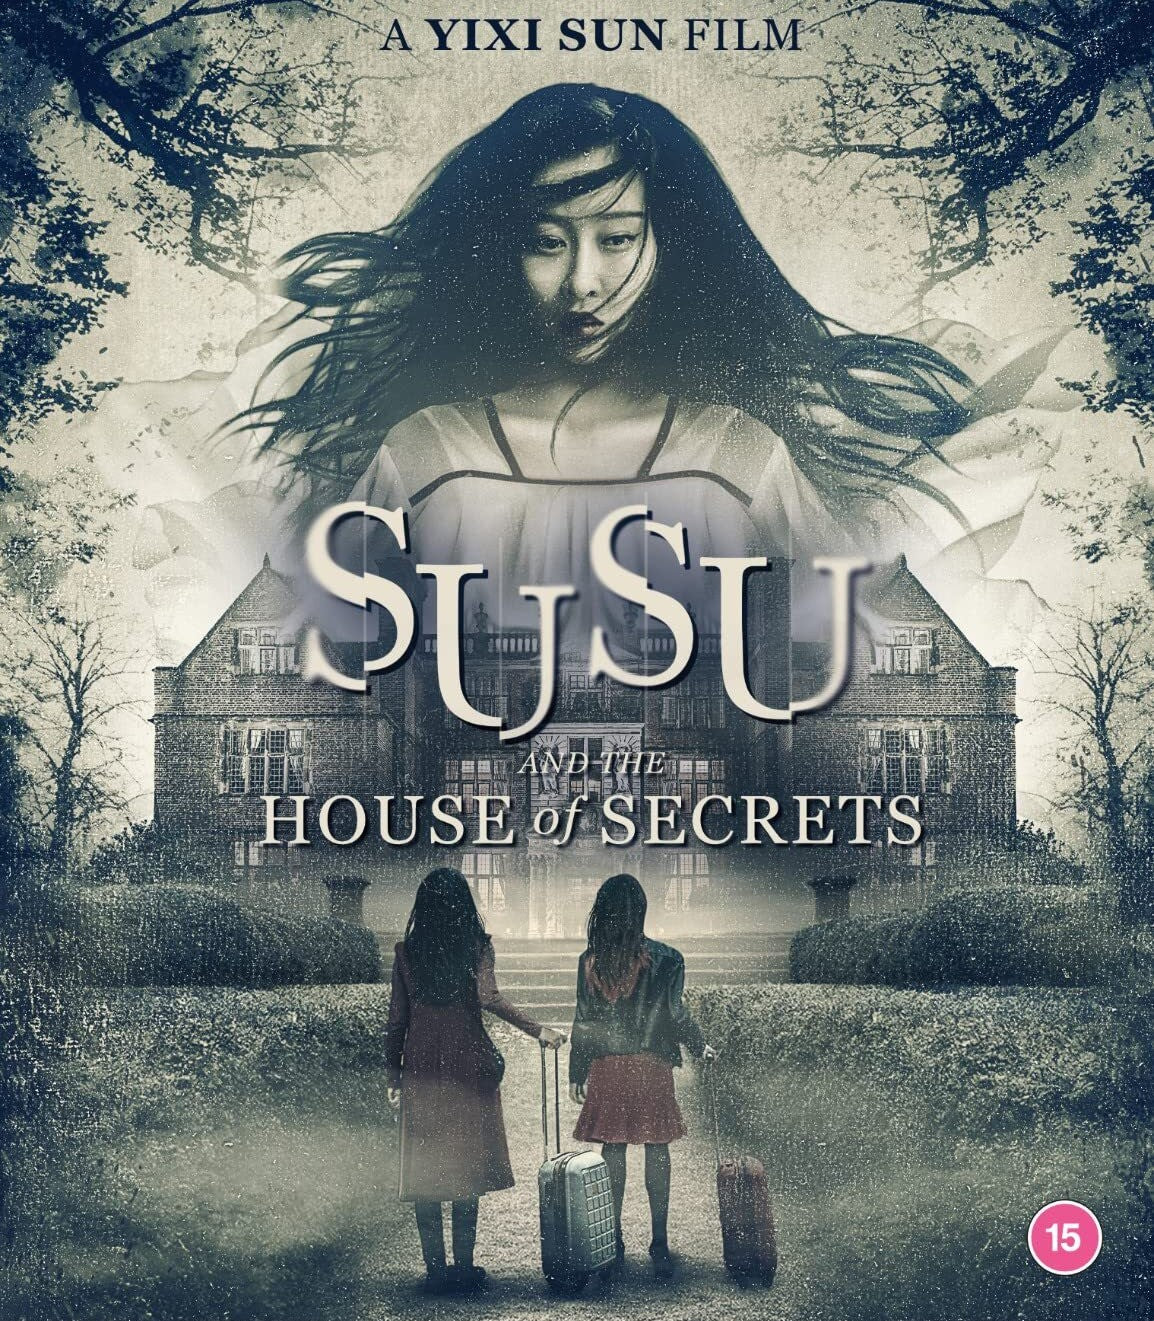 SUSU AND THE HOUSE OF SECRETS (REGION FREE IMPORT) BLU-RAY